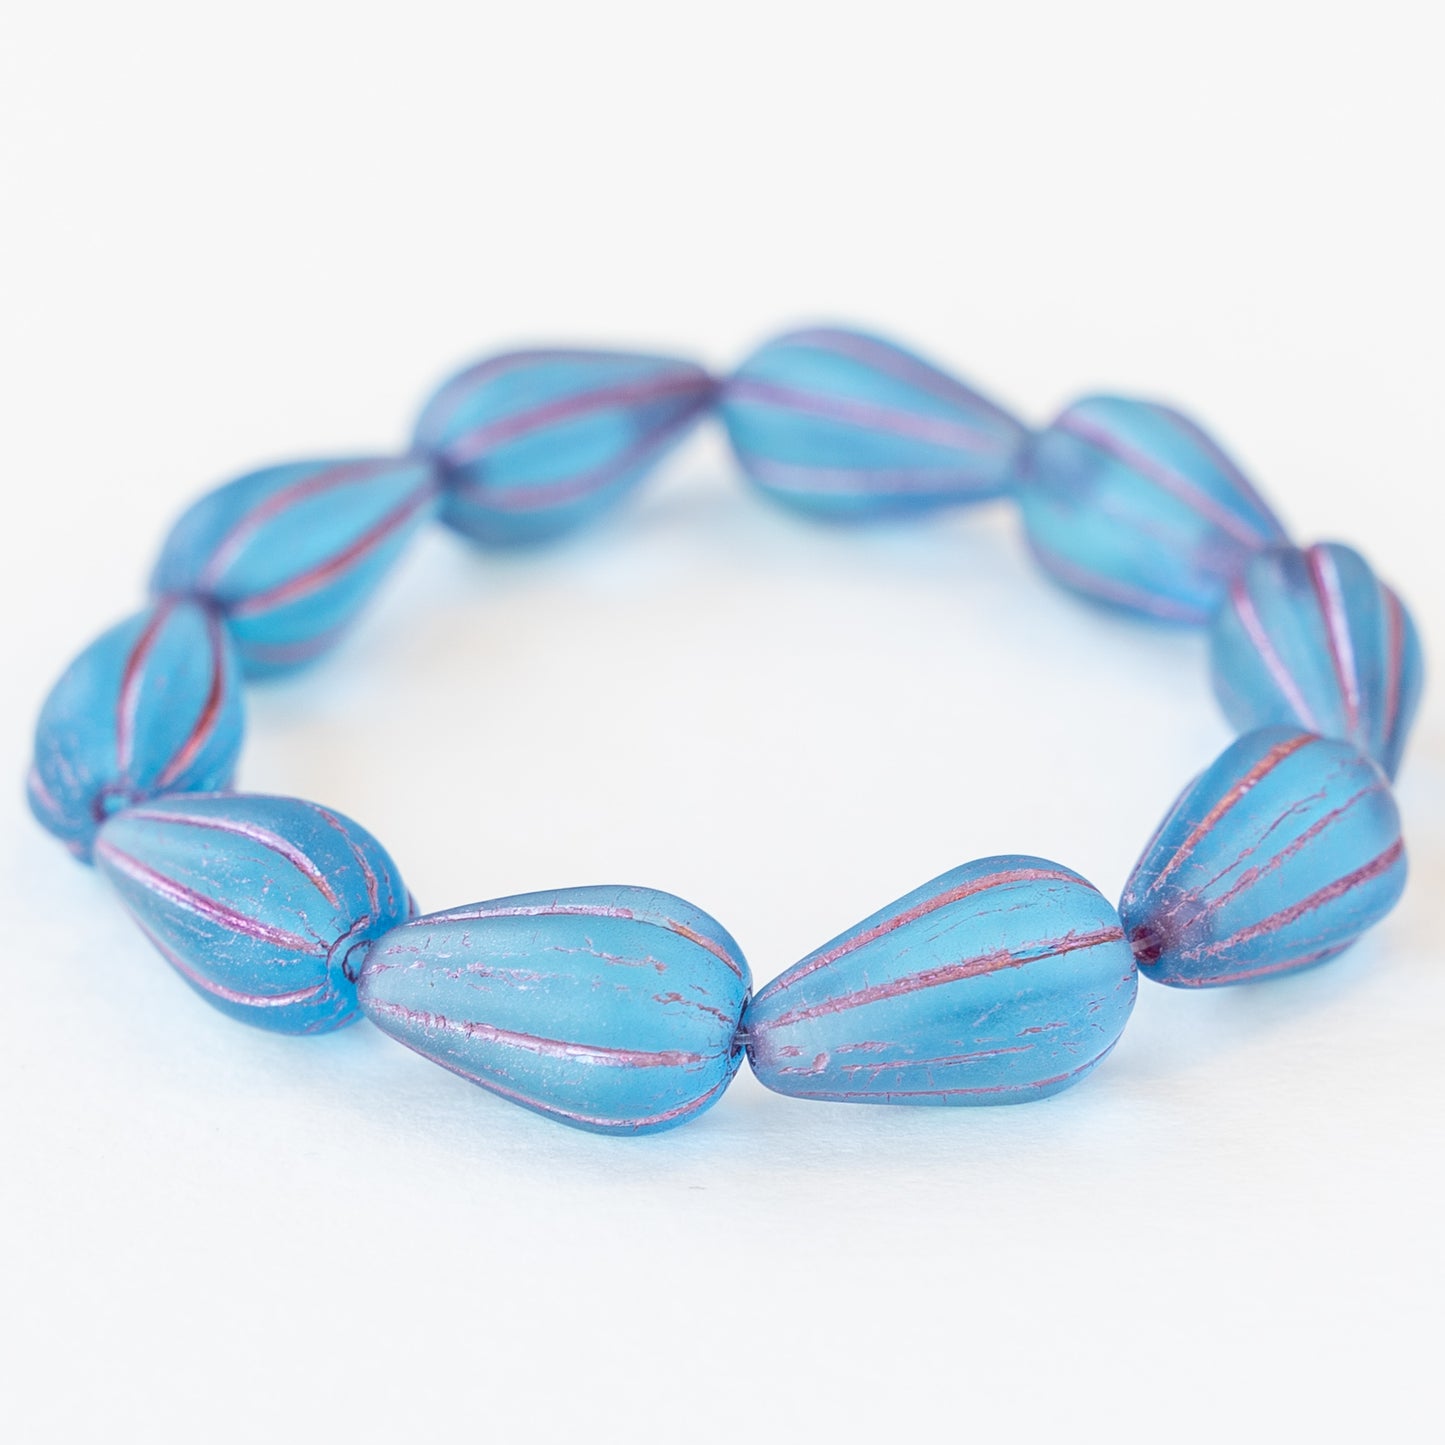 8x13mm Melon Drop - Blue with Pink Wash - 10 beads